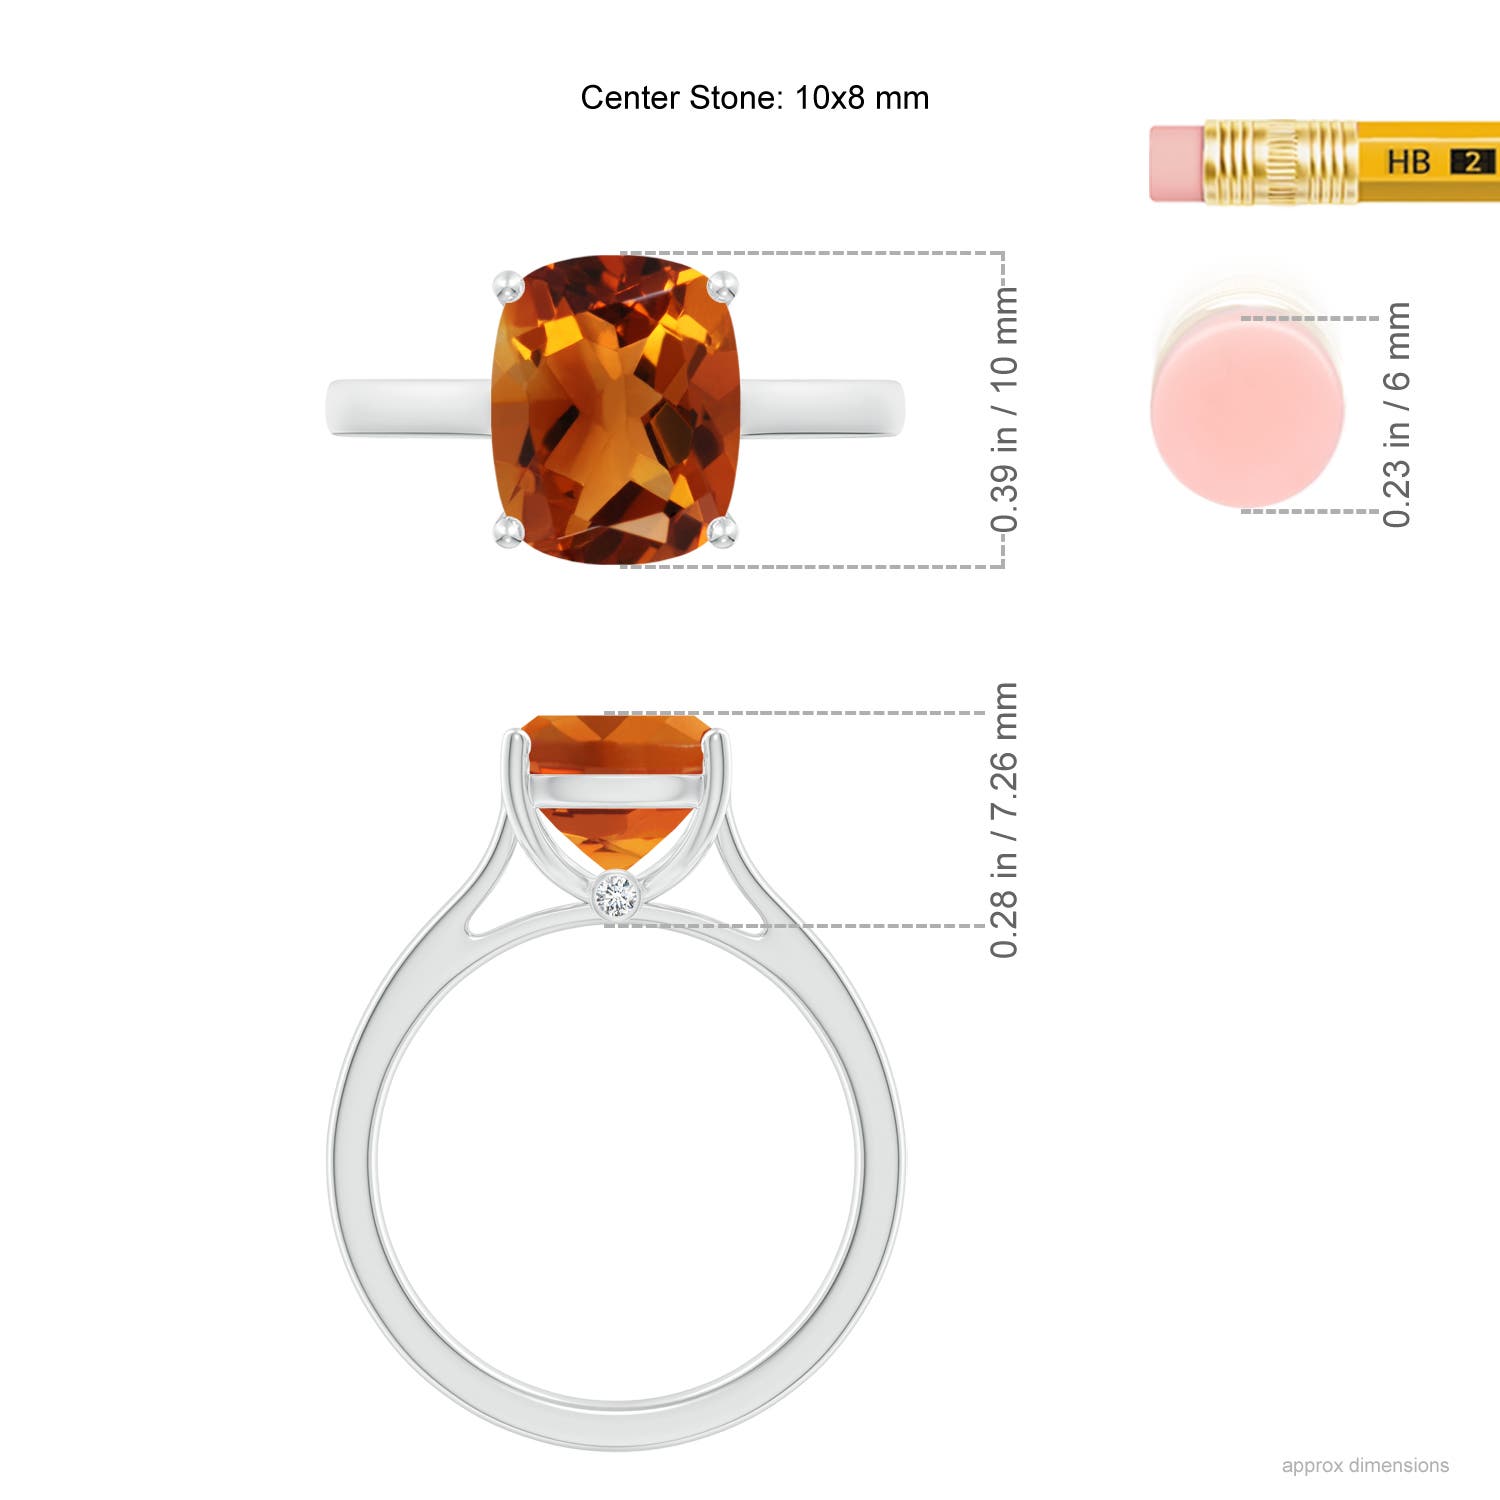 AAAA - Citrine / 2.67 CT / 14 KT White Gold